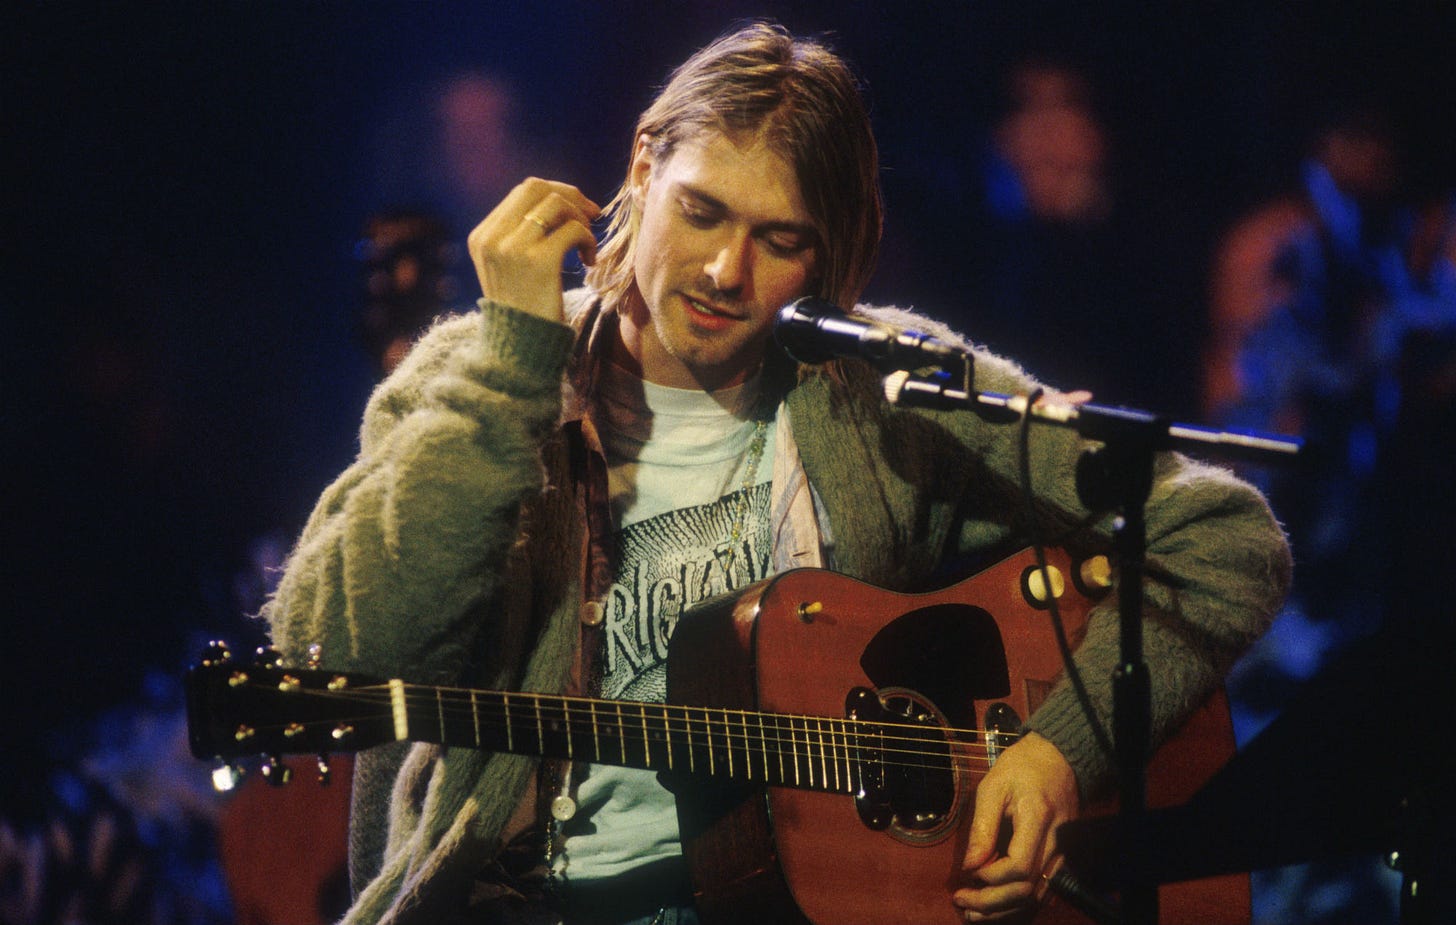 Kurt Cobain's 'MTV Unplugged' guitar is going up for auction